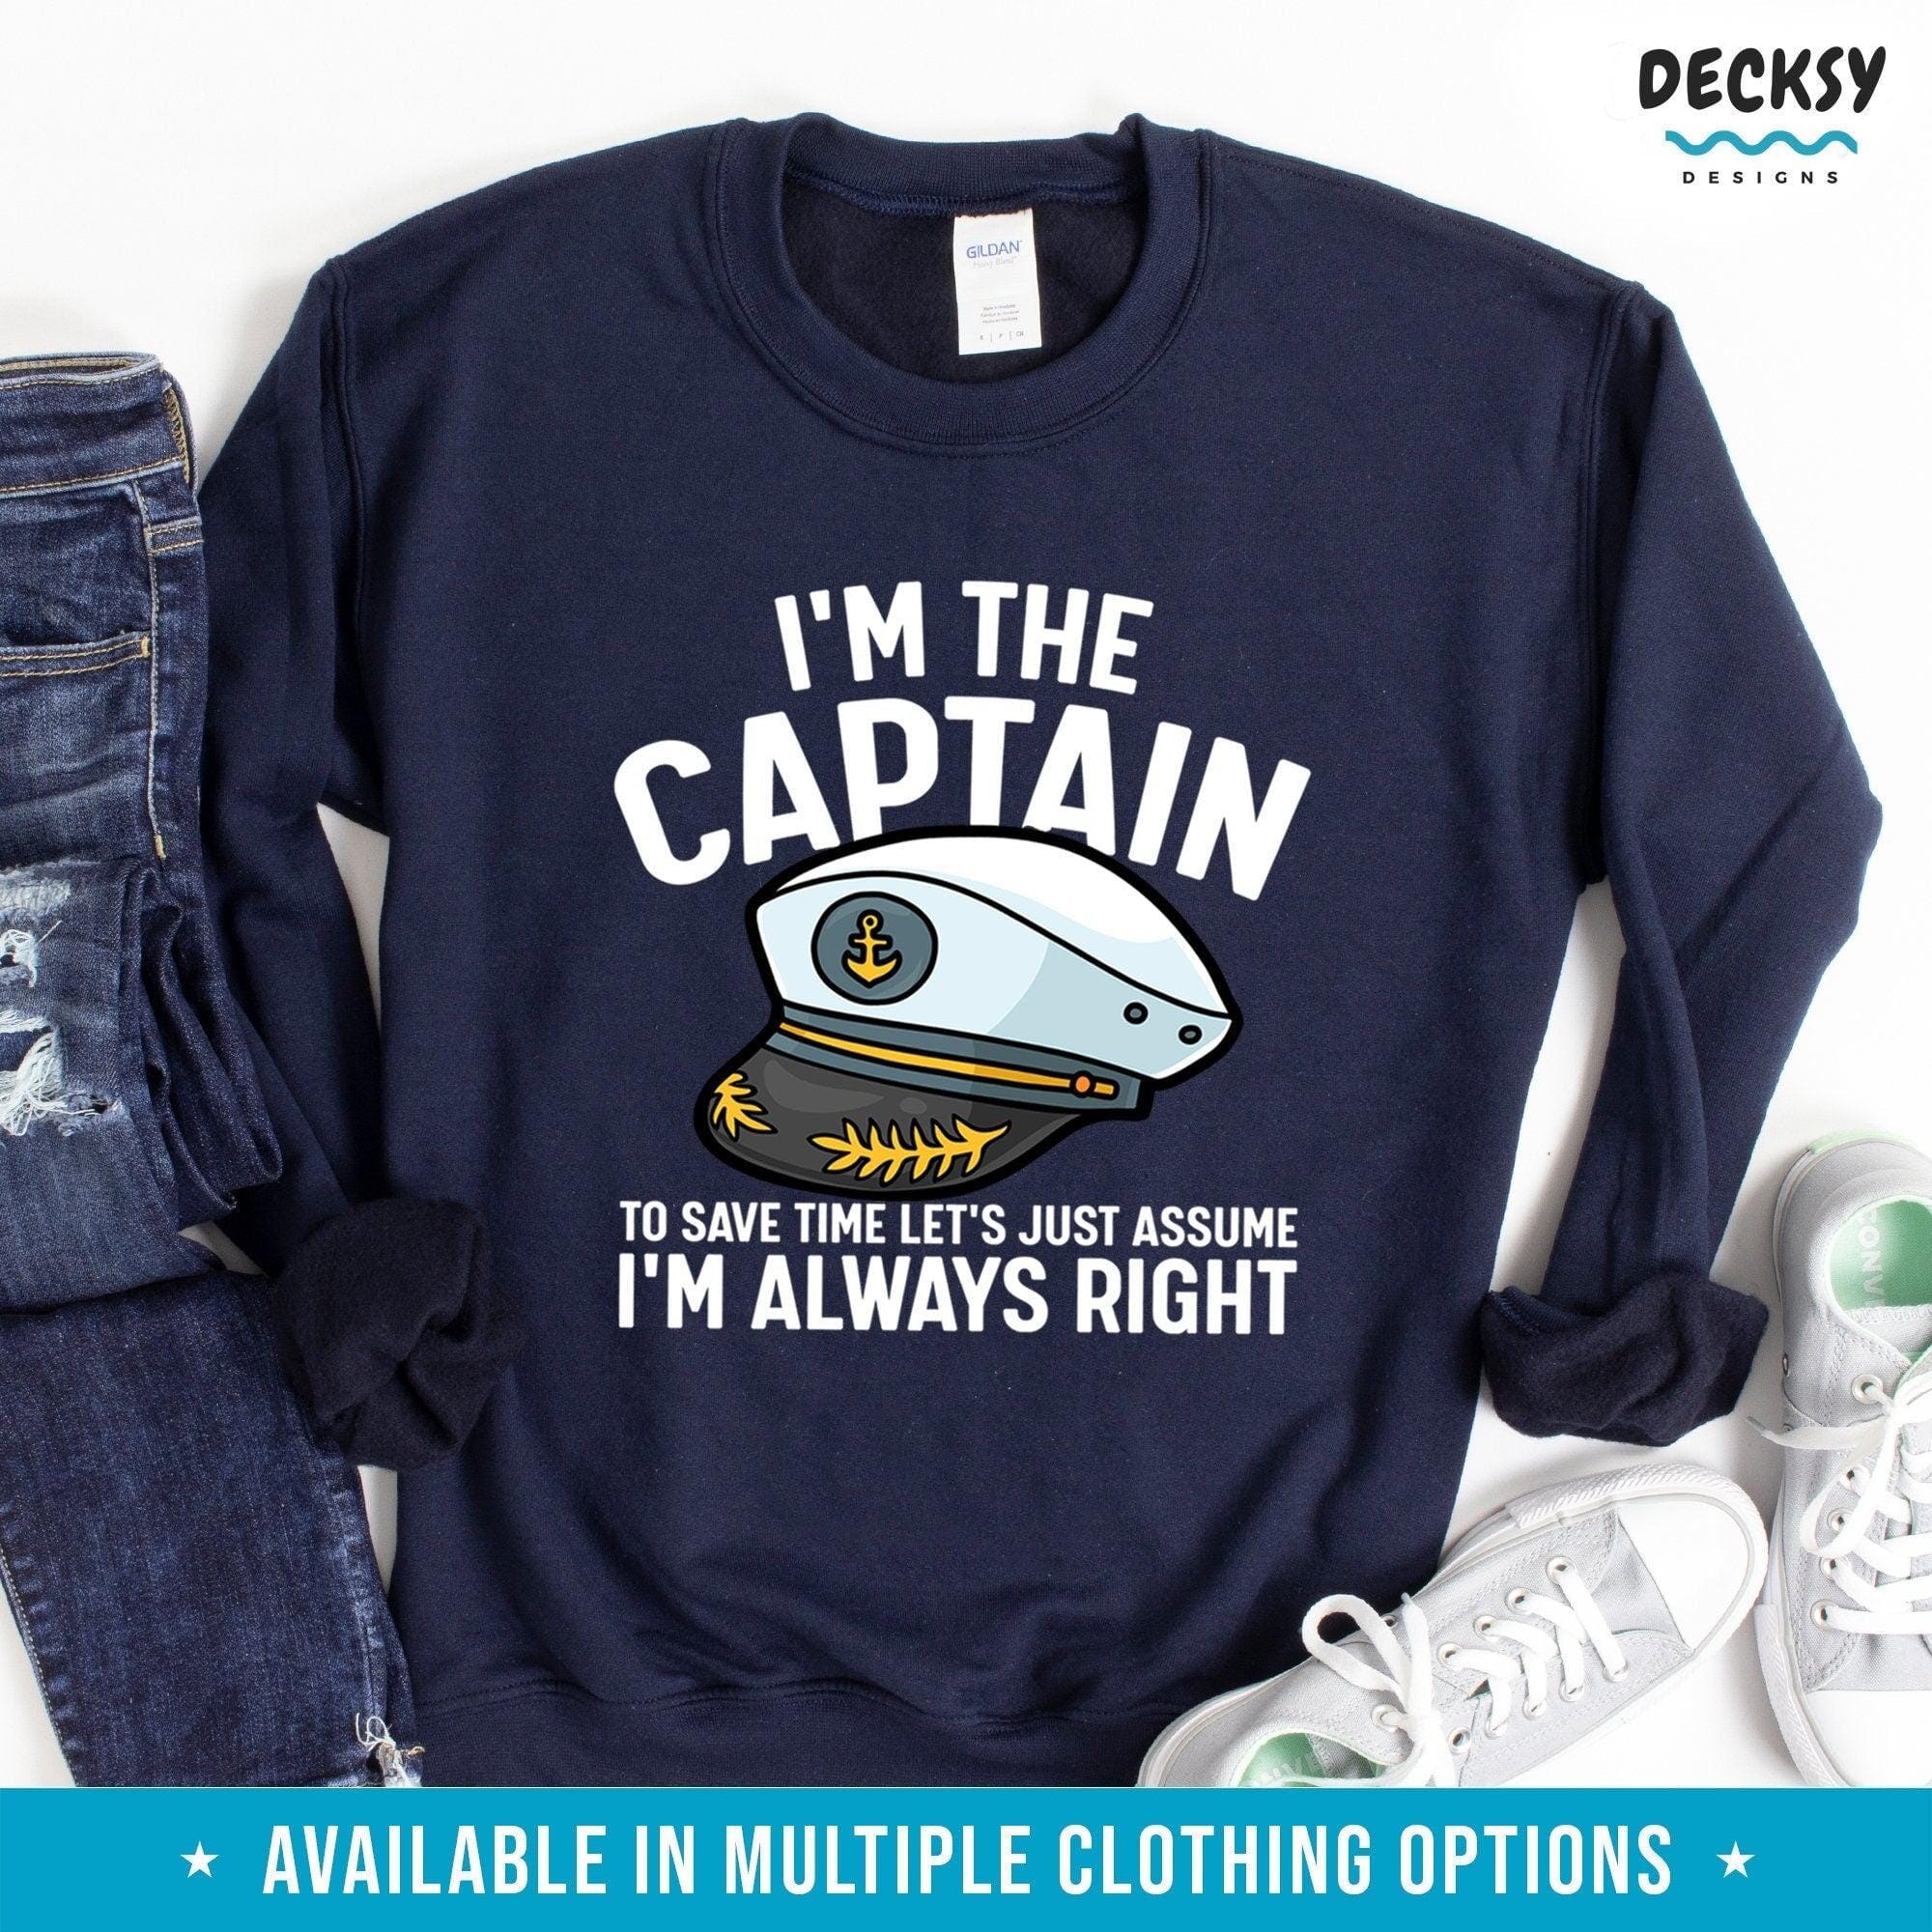 Ship Captain Sailor Shirtr, Yacht Gift-Clothing:Gender-Neutral Adult Clothing:Tops & Tees:T-shirts:Graphic Tees-DecksyDesigns